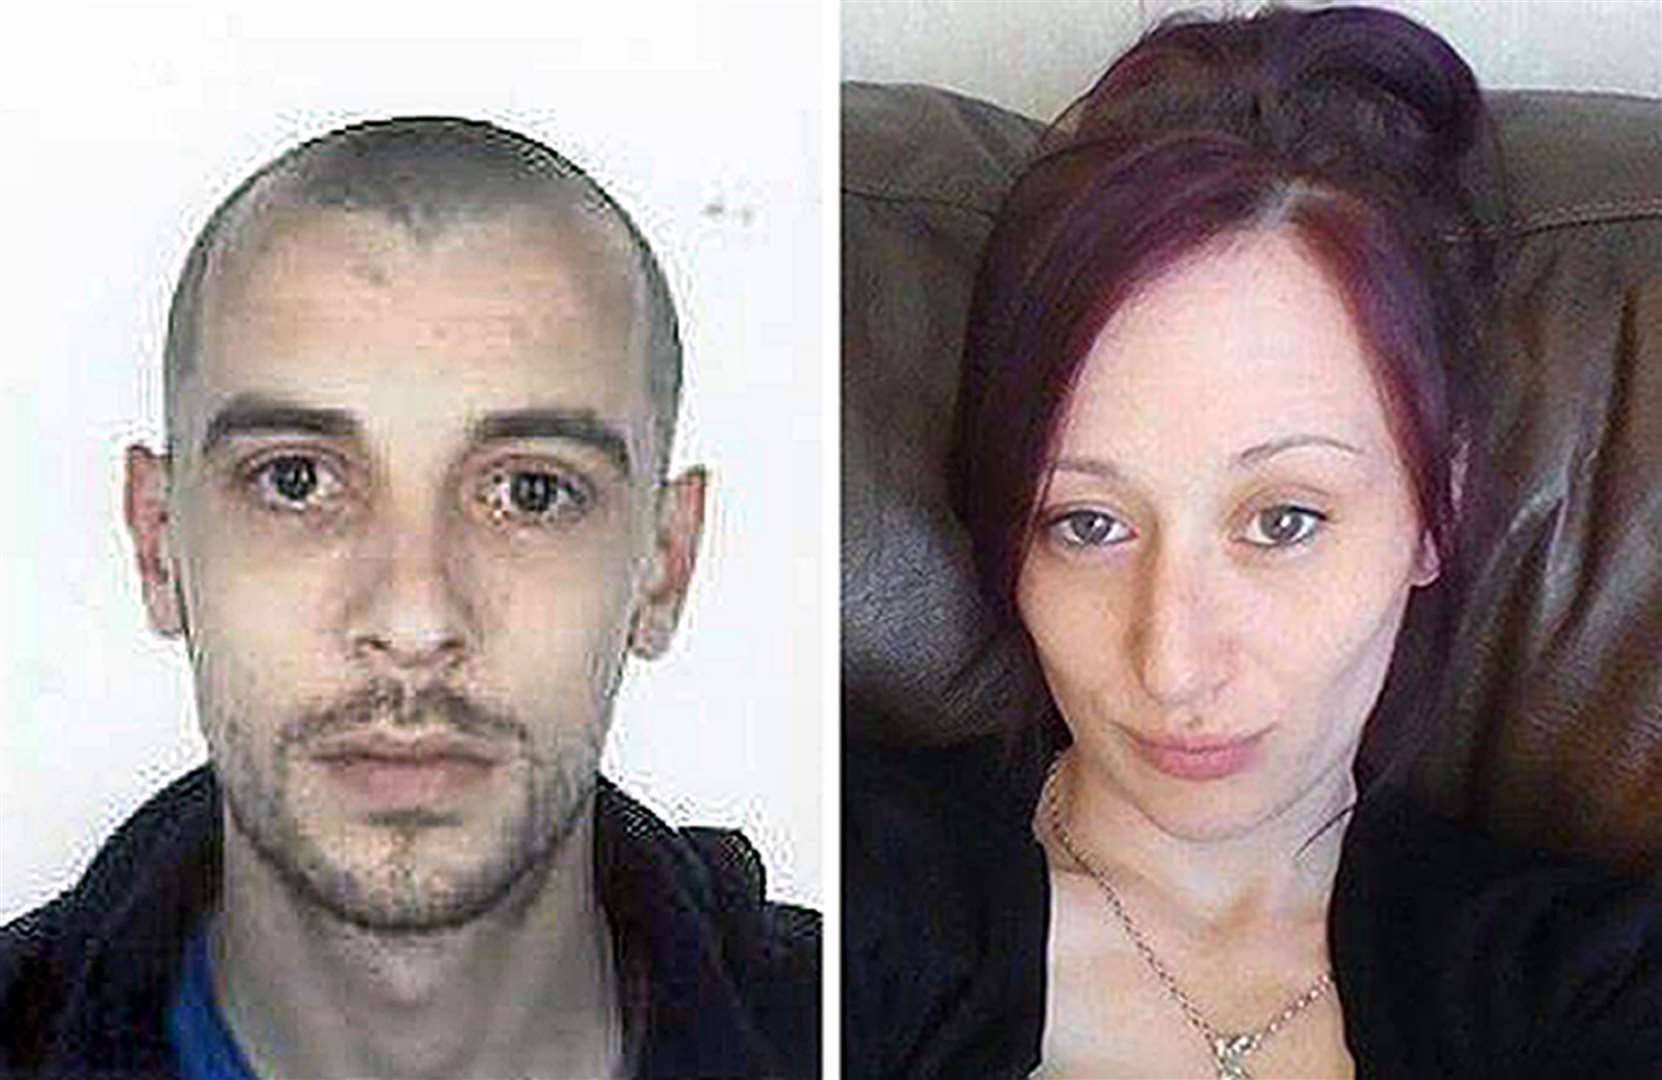 John Yuill and Lamara Bell died in the incident (Police Scotland/PA)